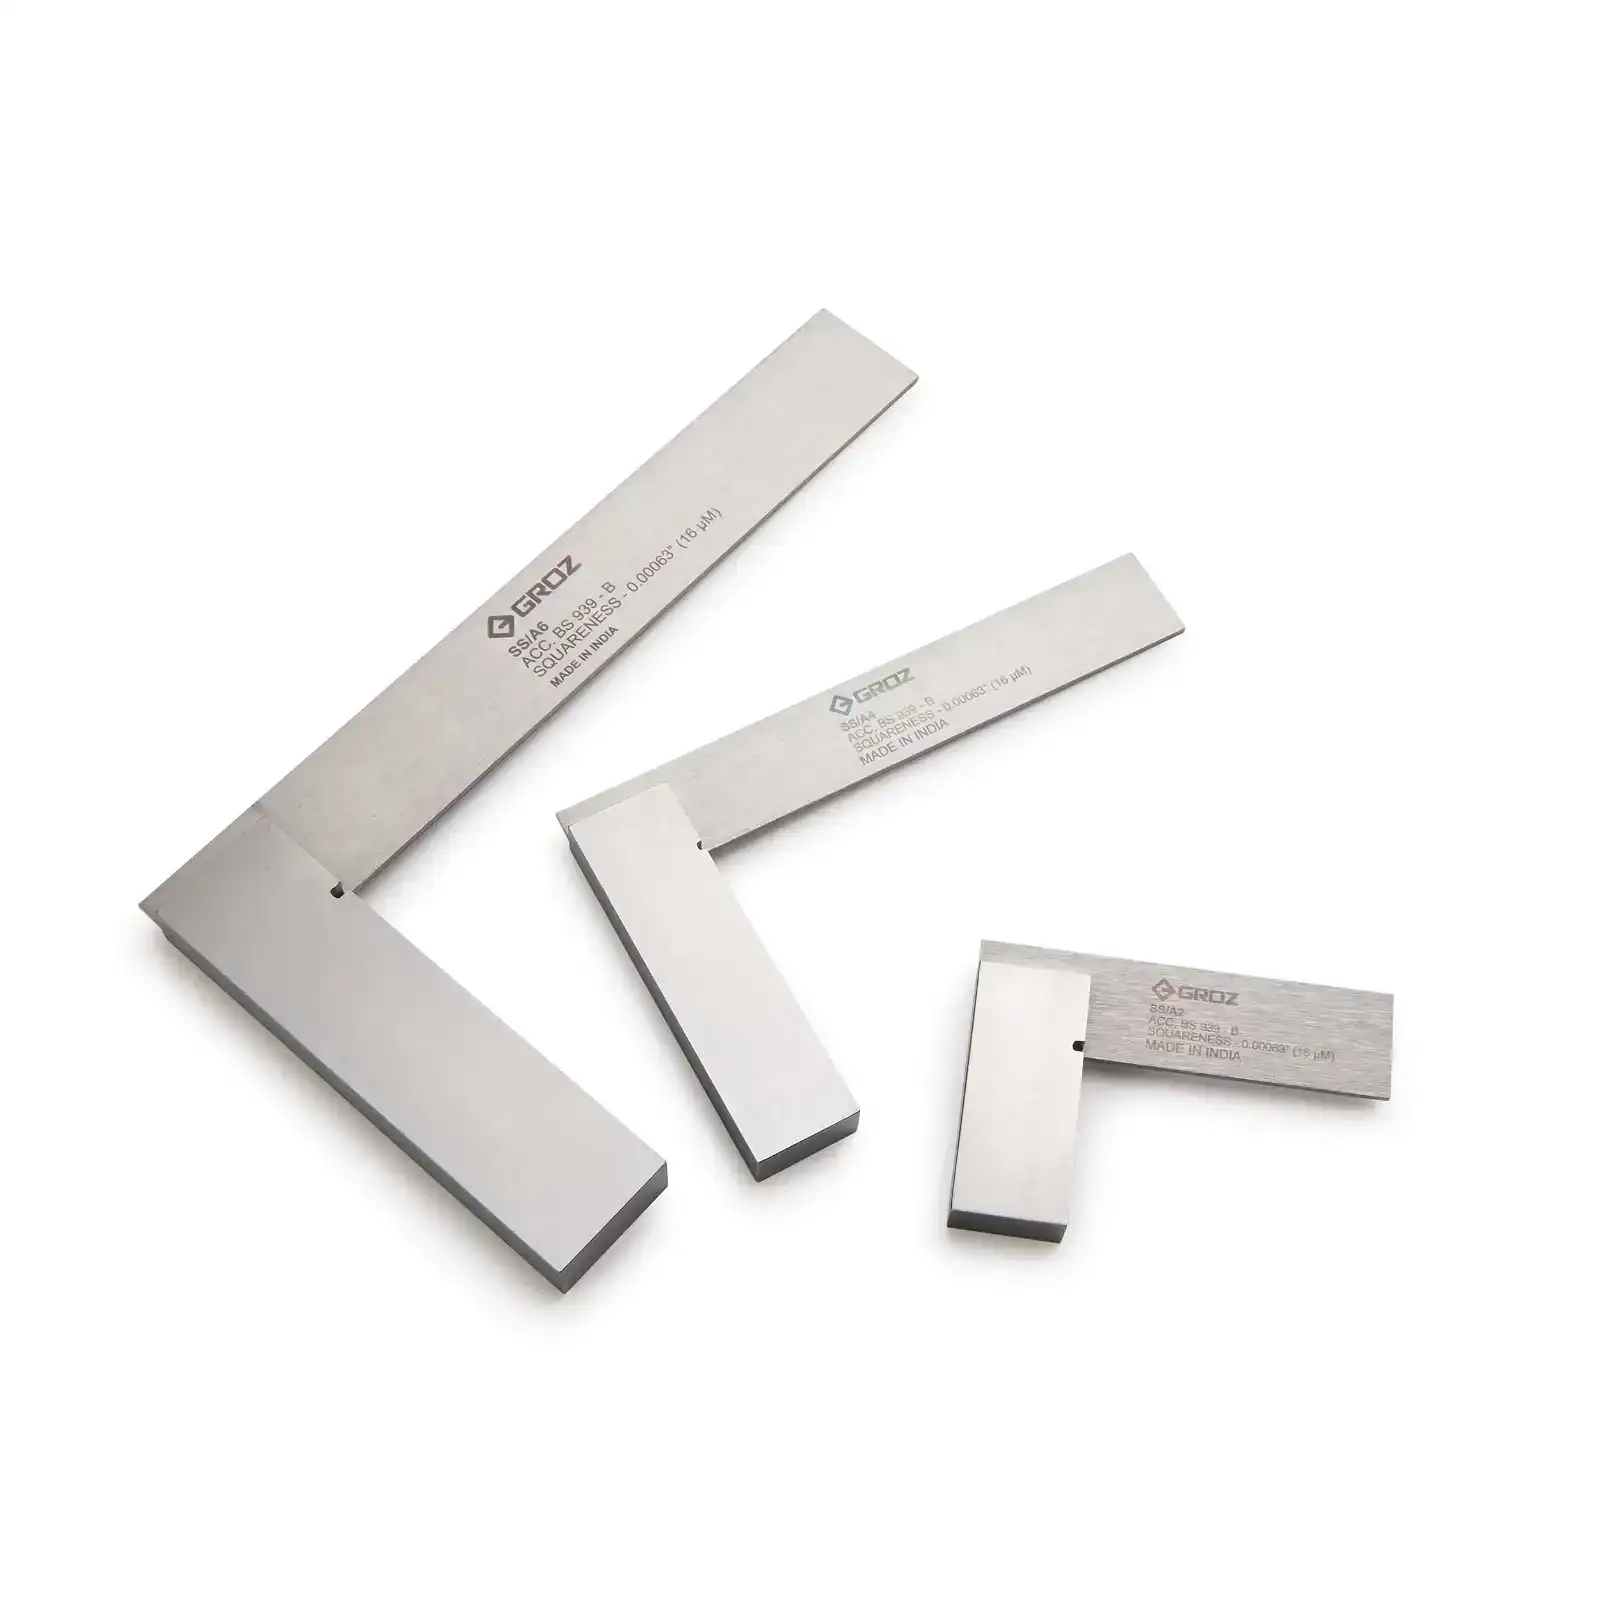 Save \\$43 - GROZ® Stainless Steel Engineers' Square